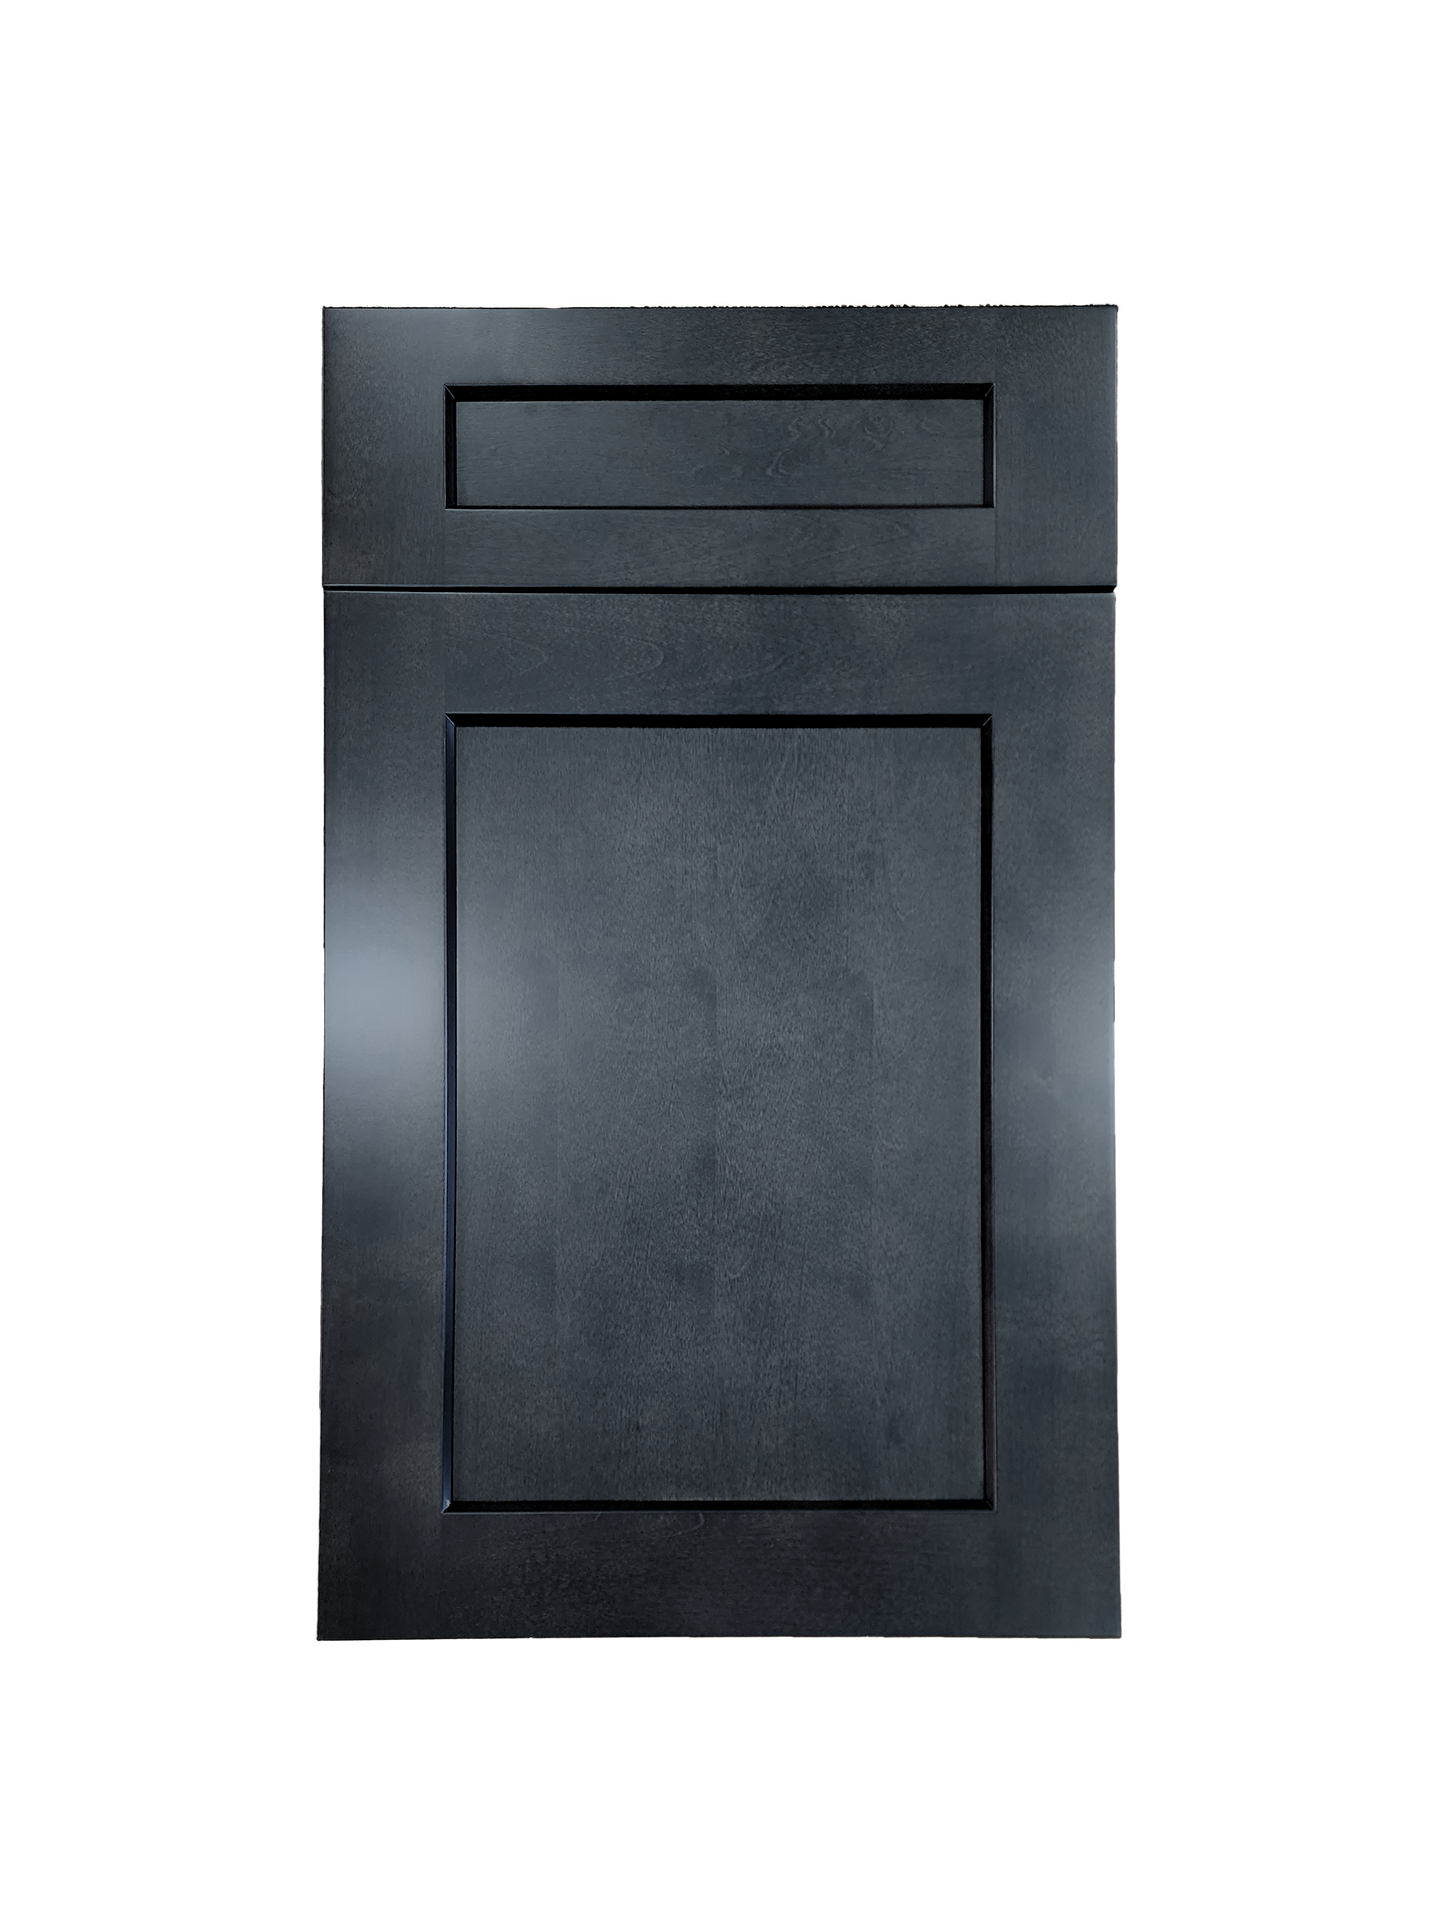 Stormy Grey Wall Refrigerator Cabinet 33 inches wide 24 inches deep 12 inches tall with Stormy Grey box and Stormy Grey doors